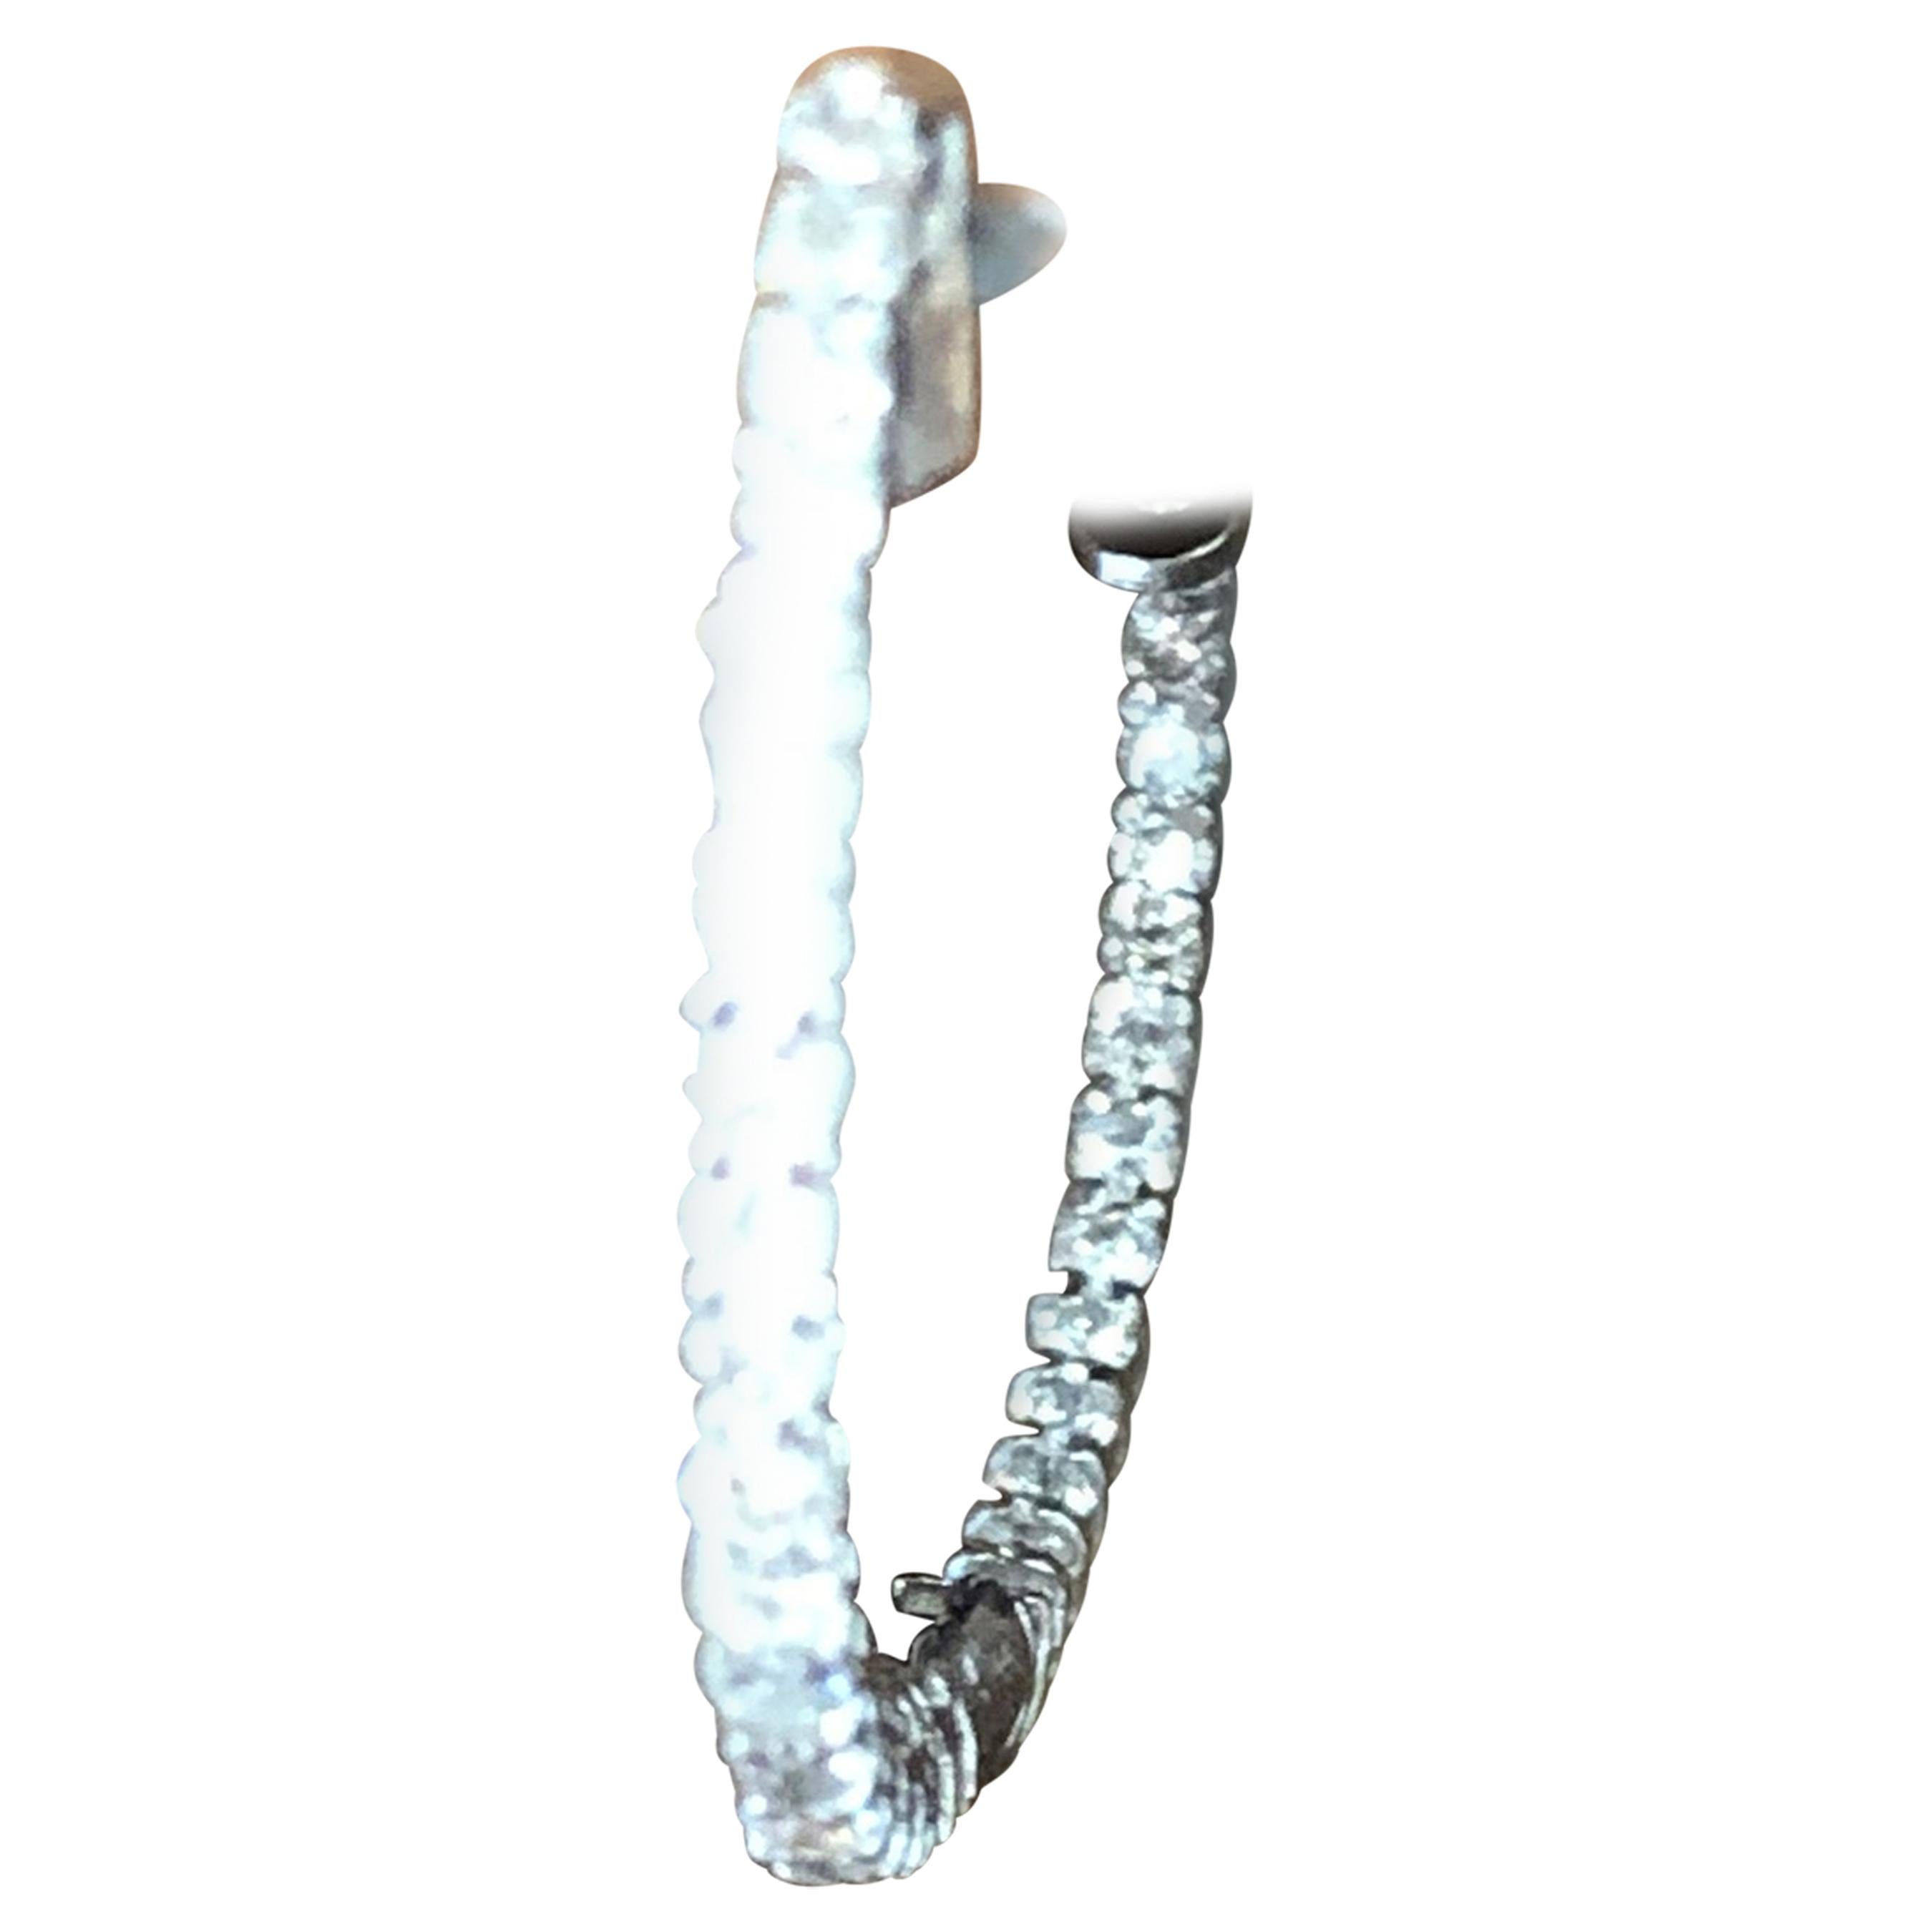 1.44 Carat Diamond in and Out Hoops Earrings in 14 Karat White Gold